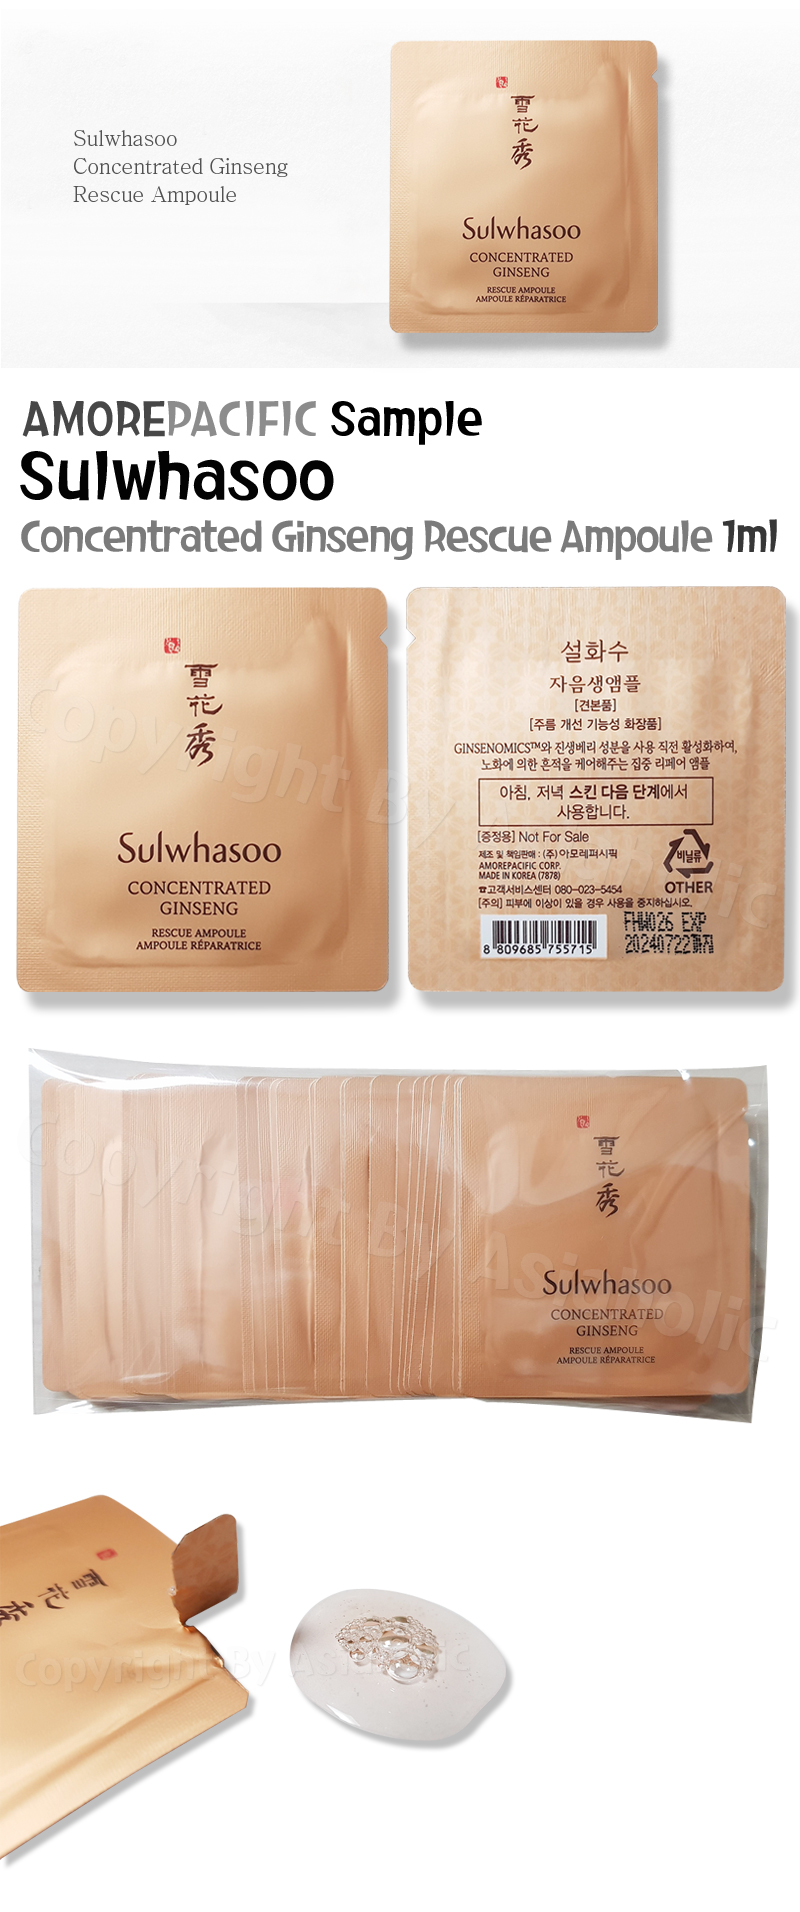 Sulwhasoo Concentrated Ginseng Rescue Ampoule 1ml x 30pcs (30ml) Sample Newist Version